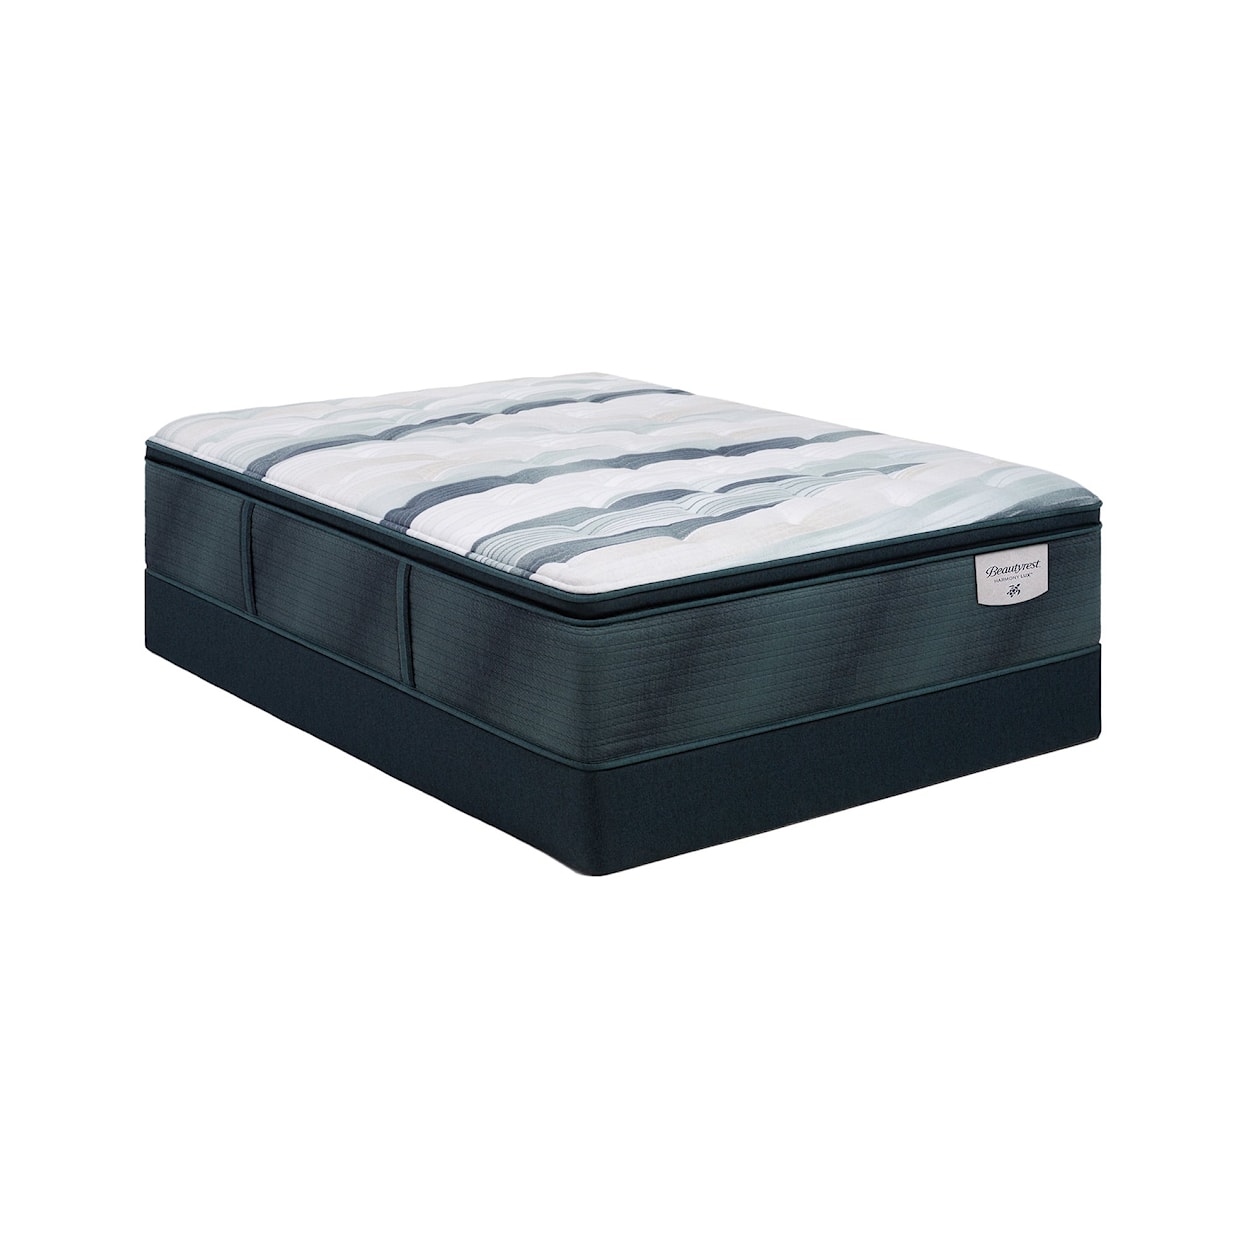 Beautyrest Harmony Lux CORAL ISLAND PL PT California King Mattress